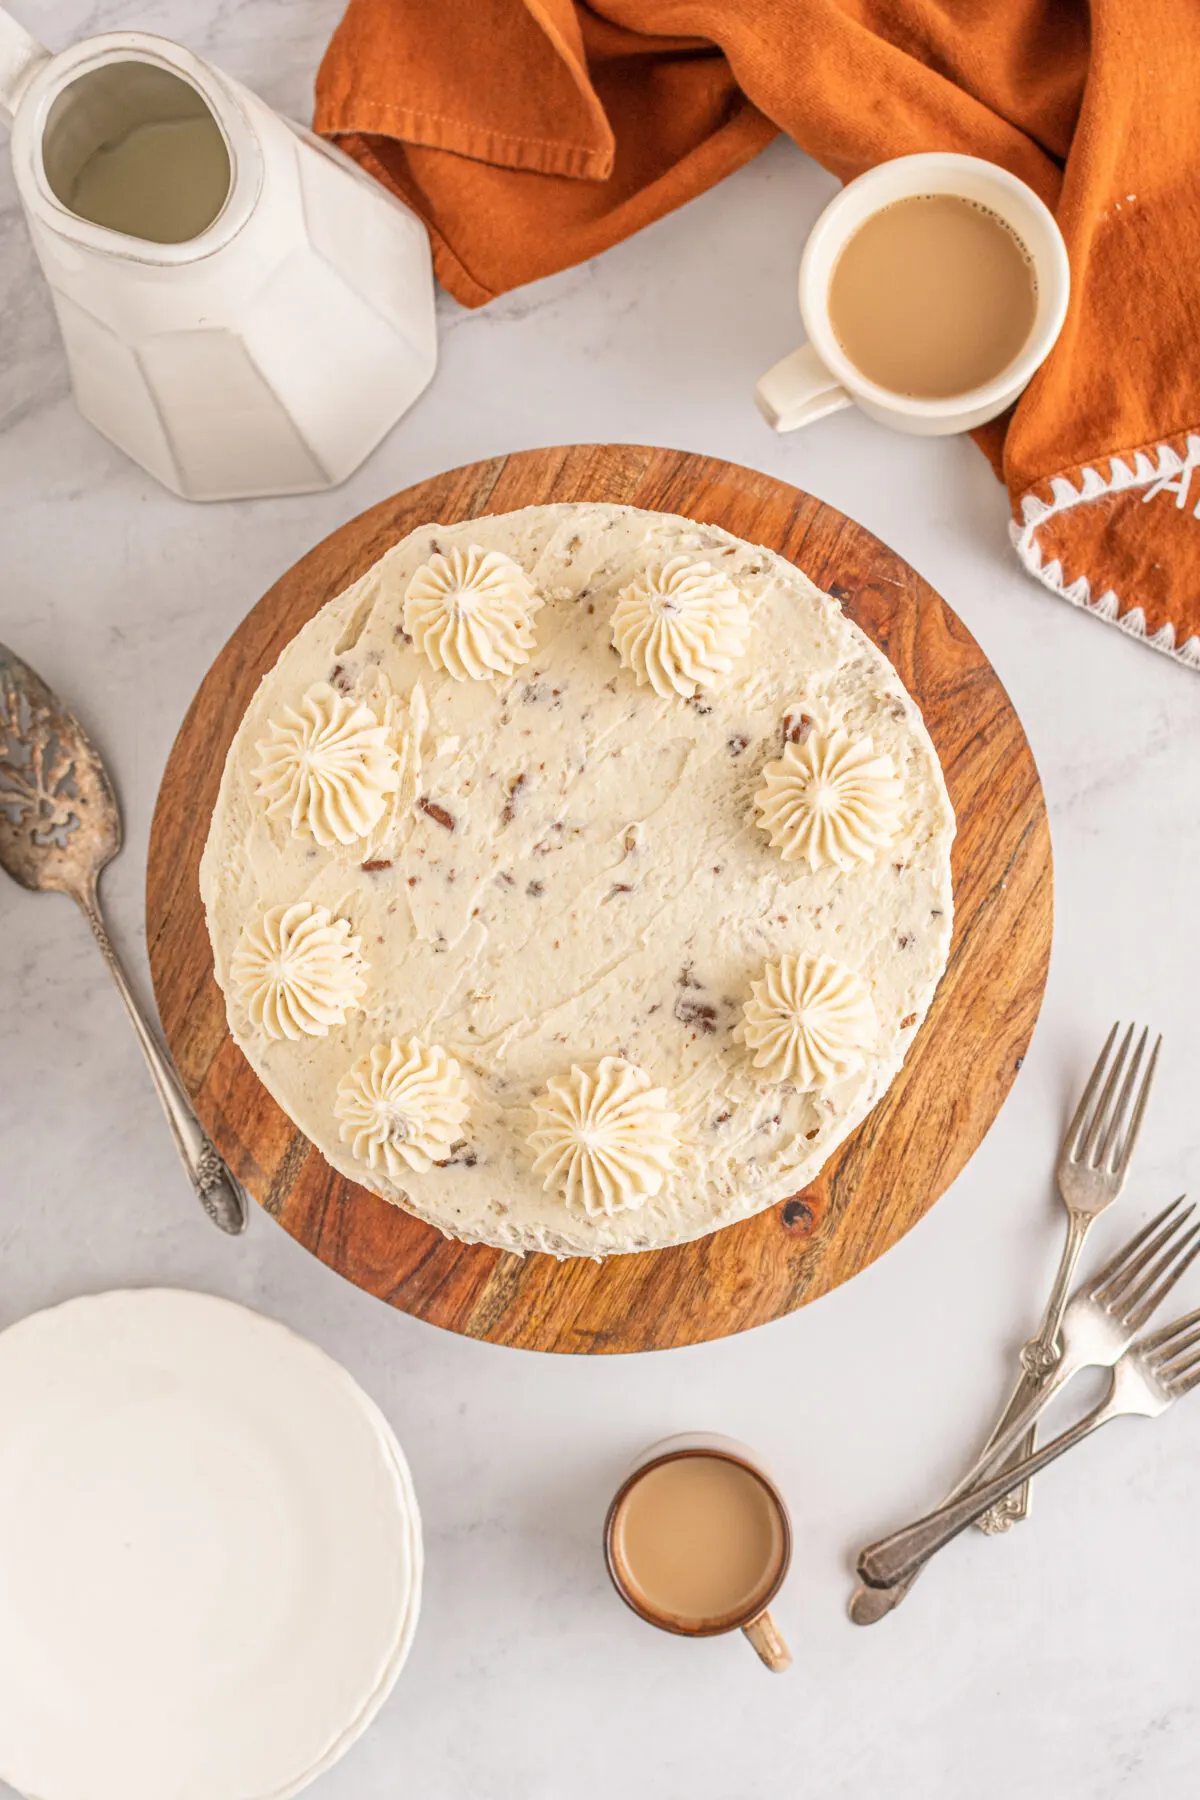 Loaded with buttery pecans, this delicious and moist butter pecan cake is layered with a rich cream cheese frosting. This cake is the best!